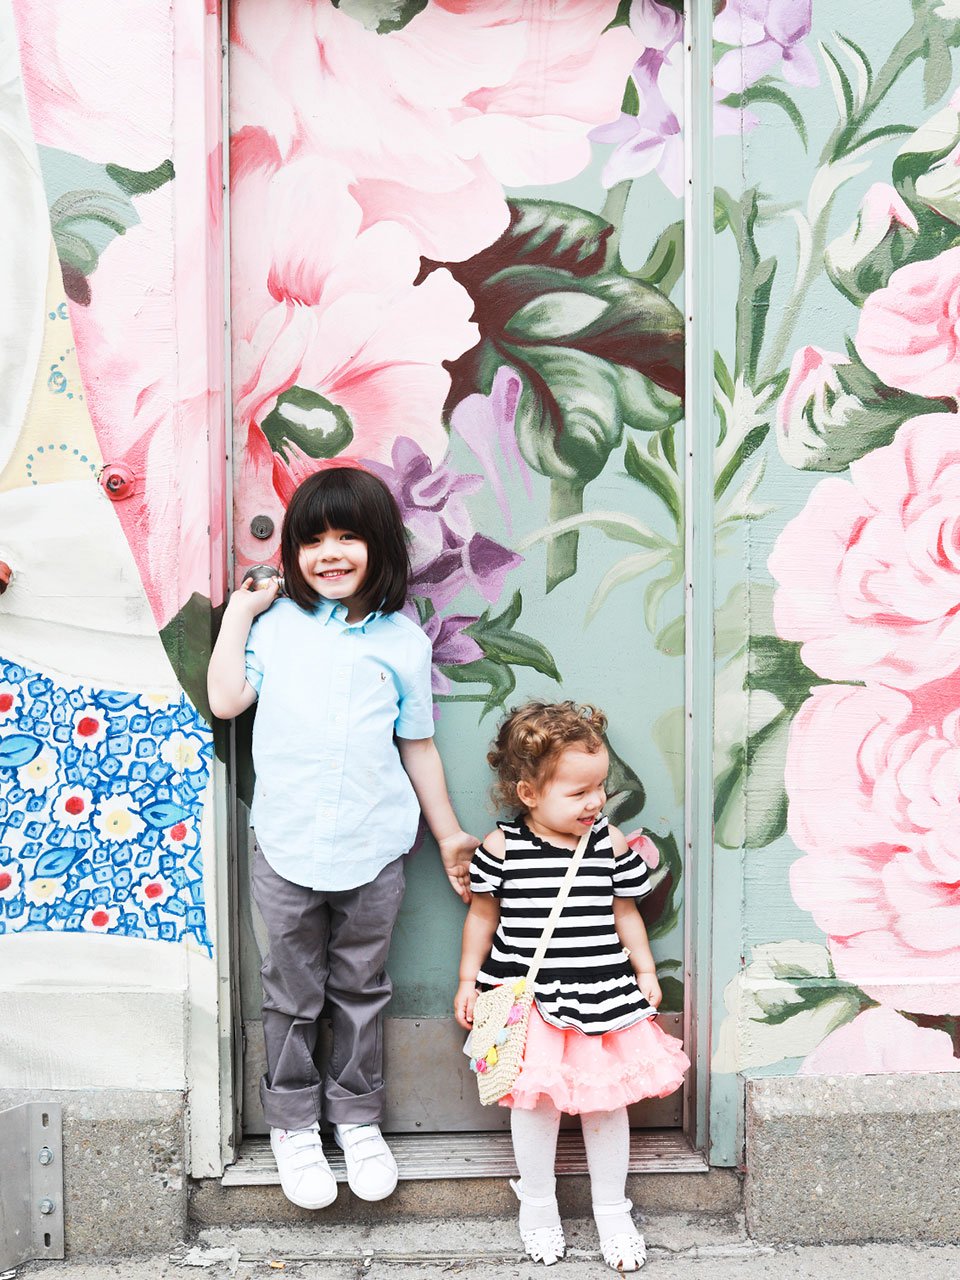 Author's kids standing in front of a mural wearing marshalls clothing